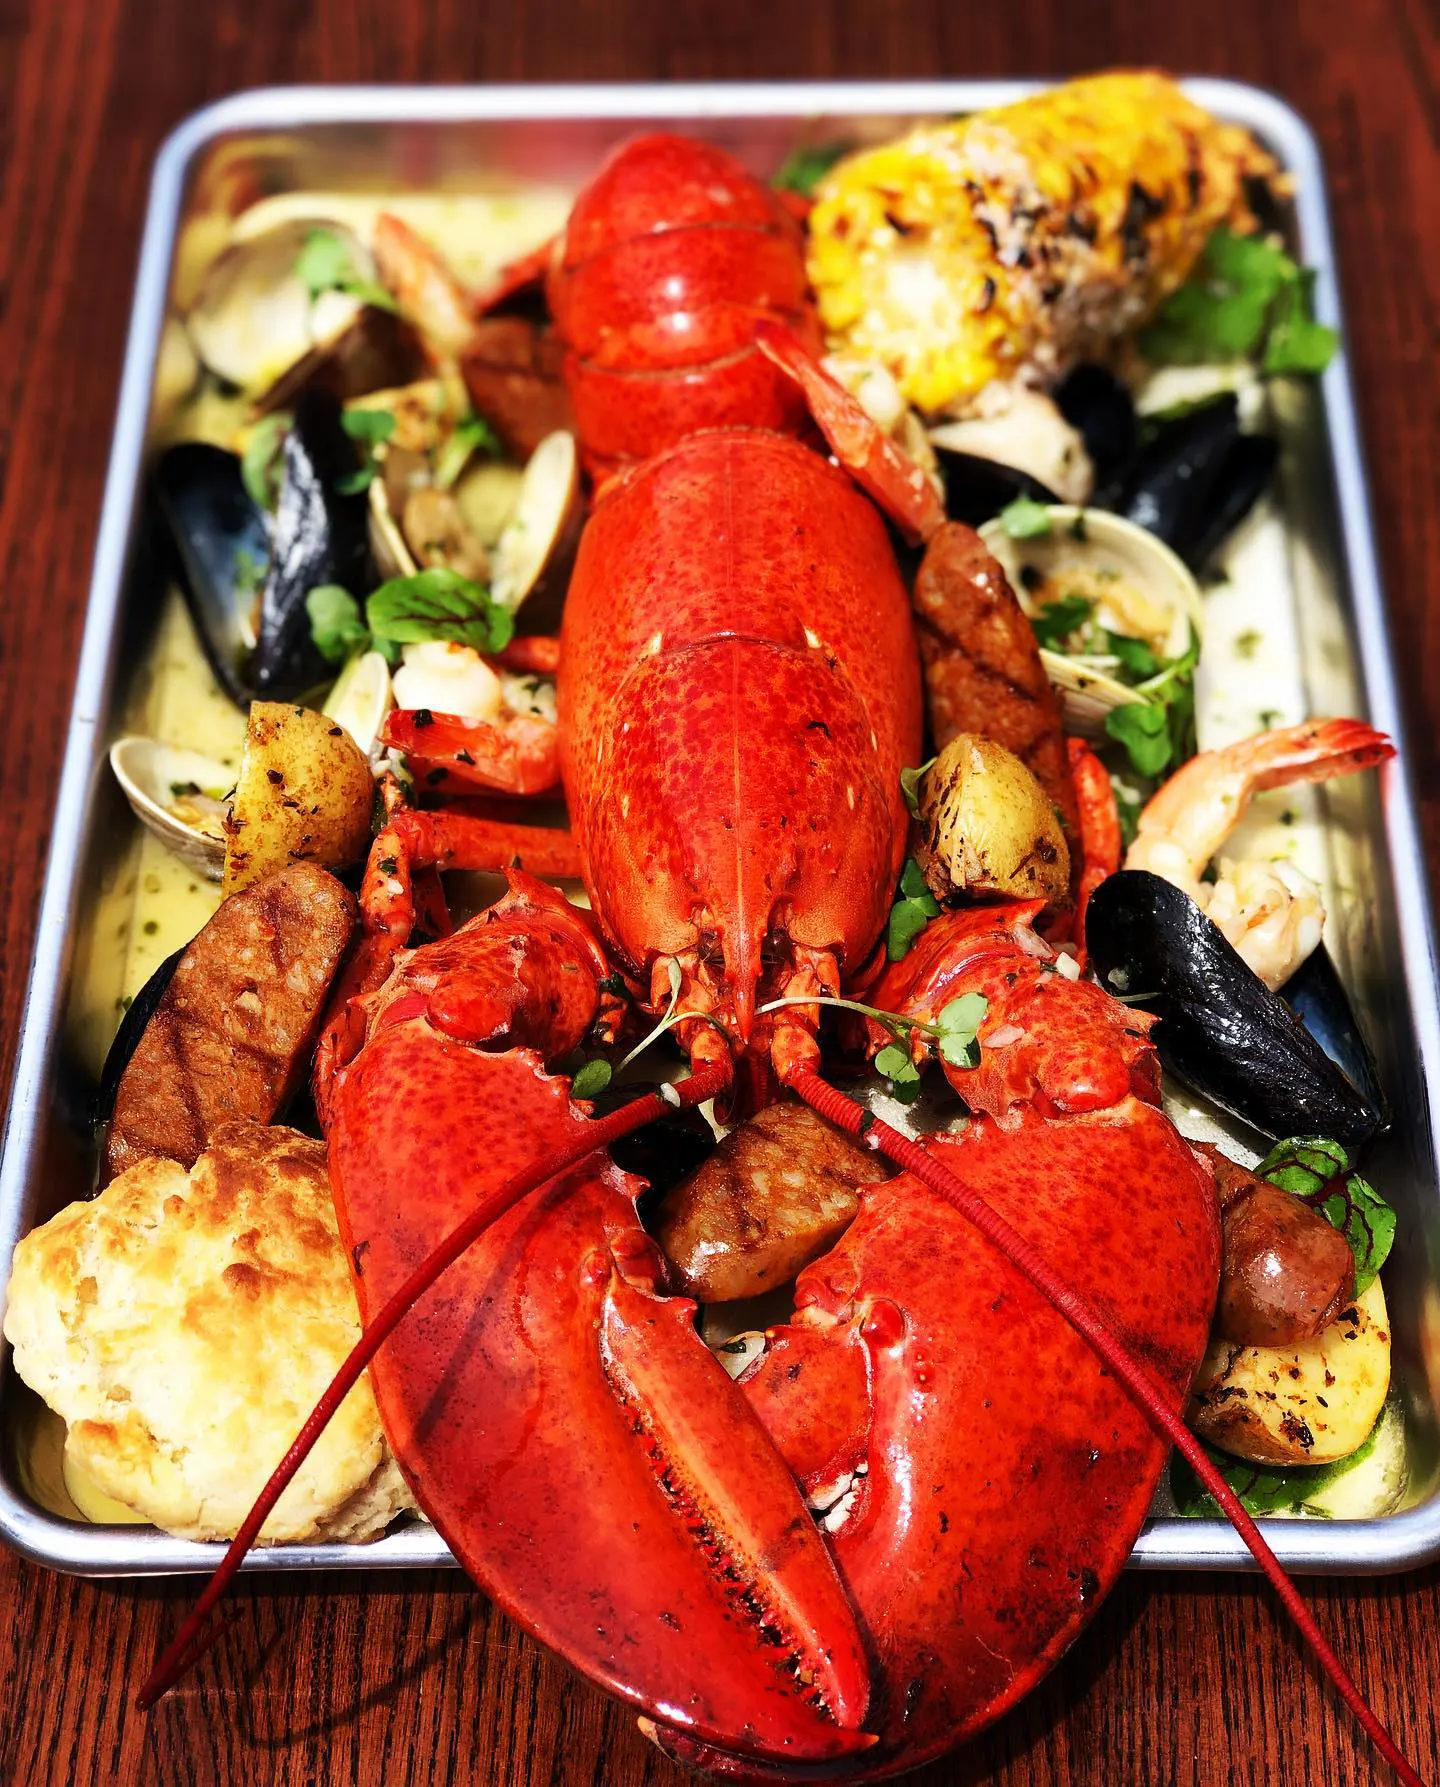 baked lobster entree with vegetables, mussels & clams